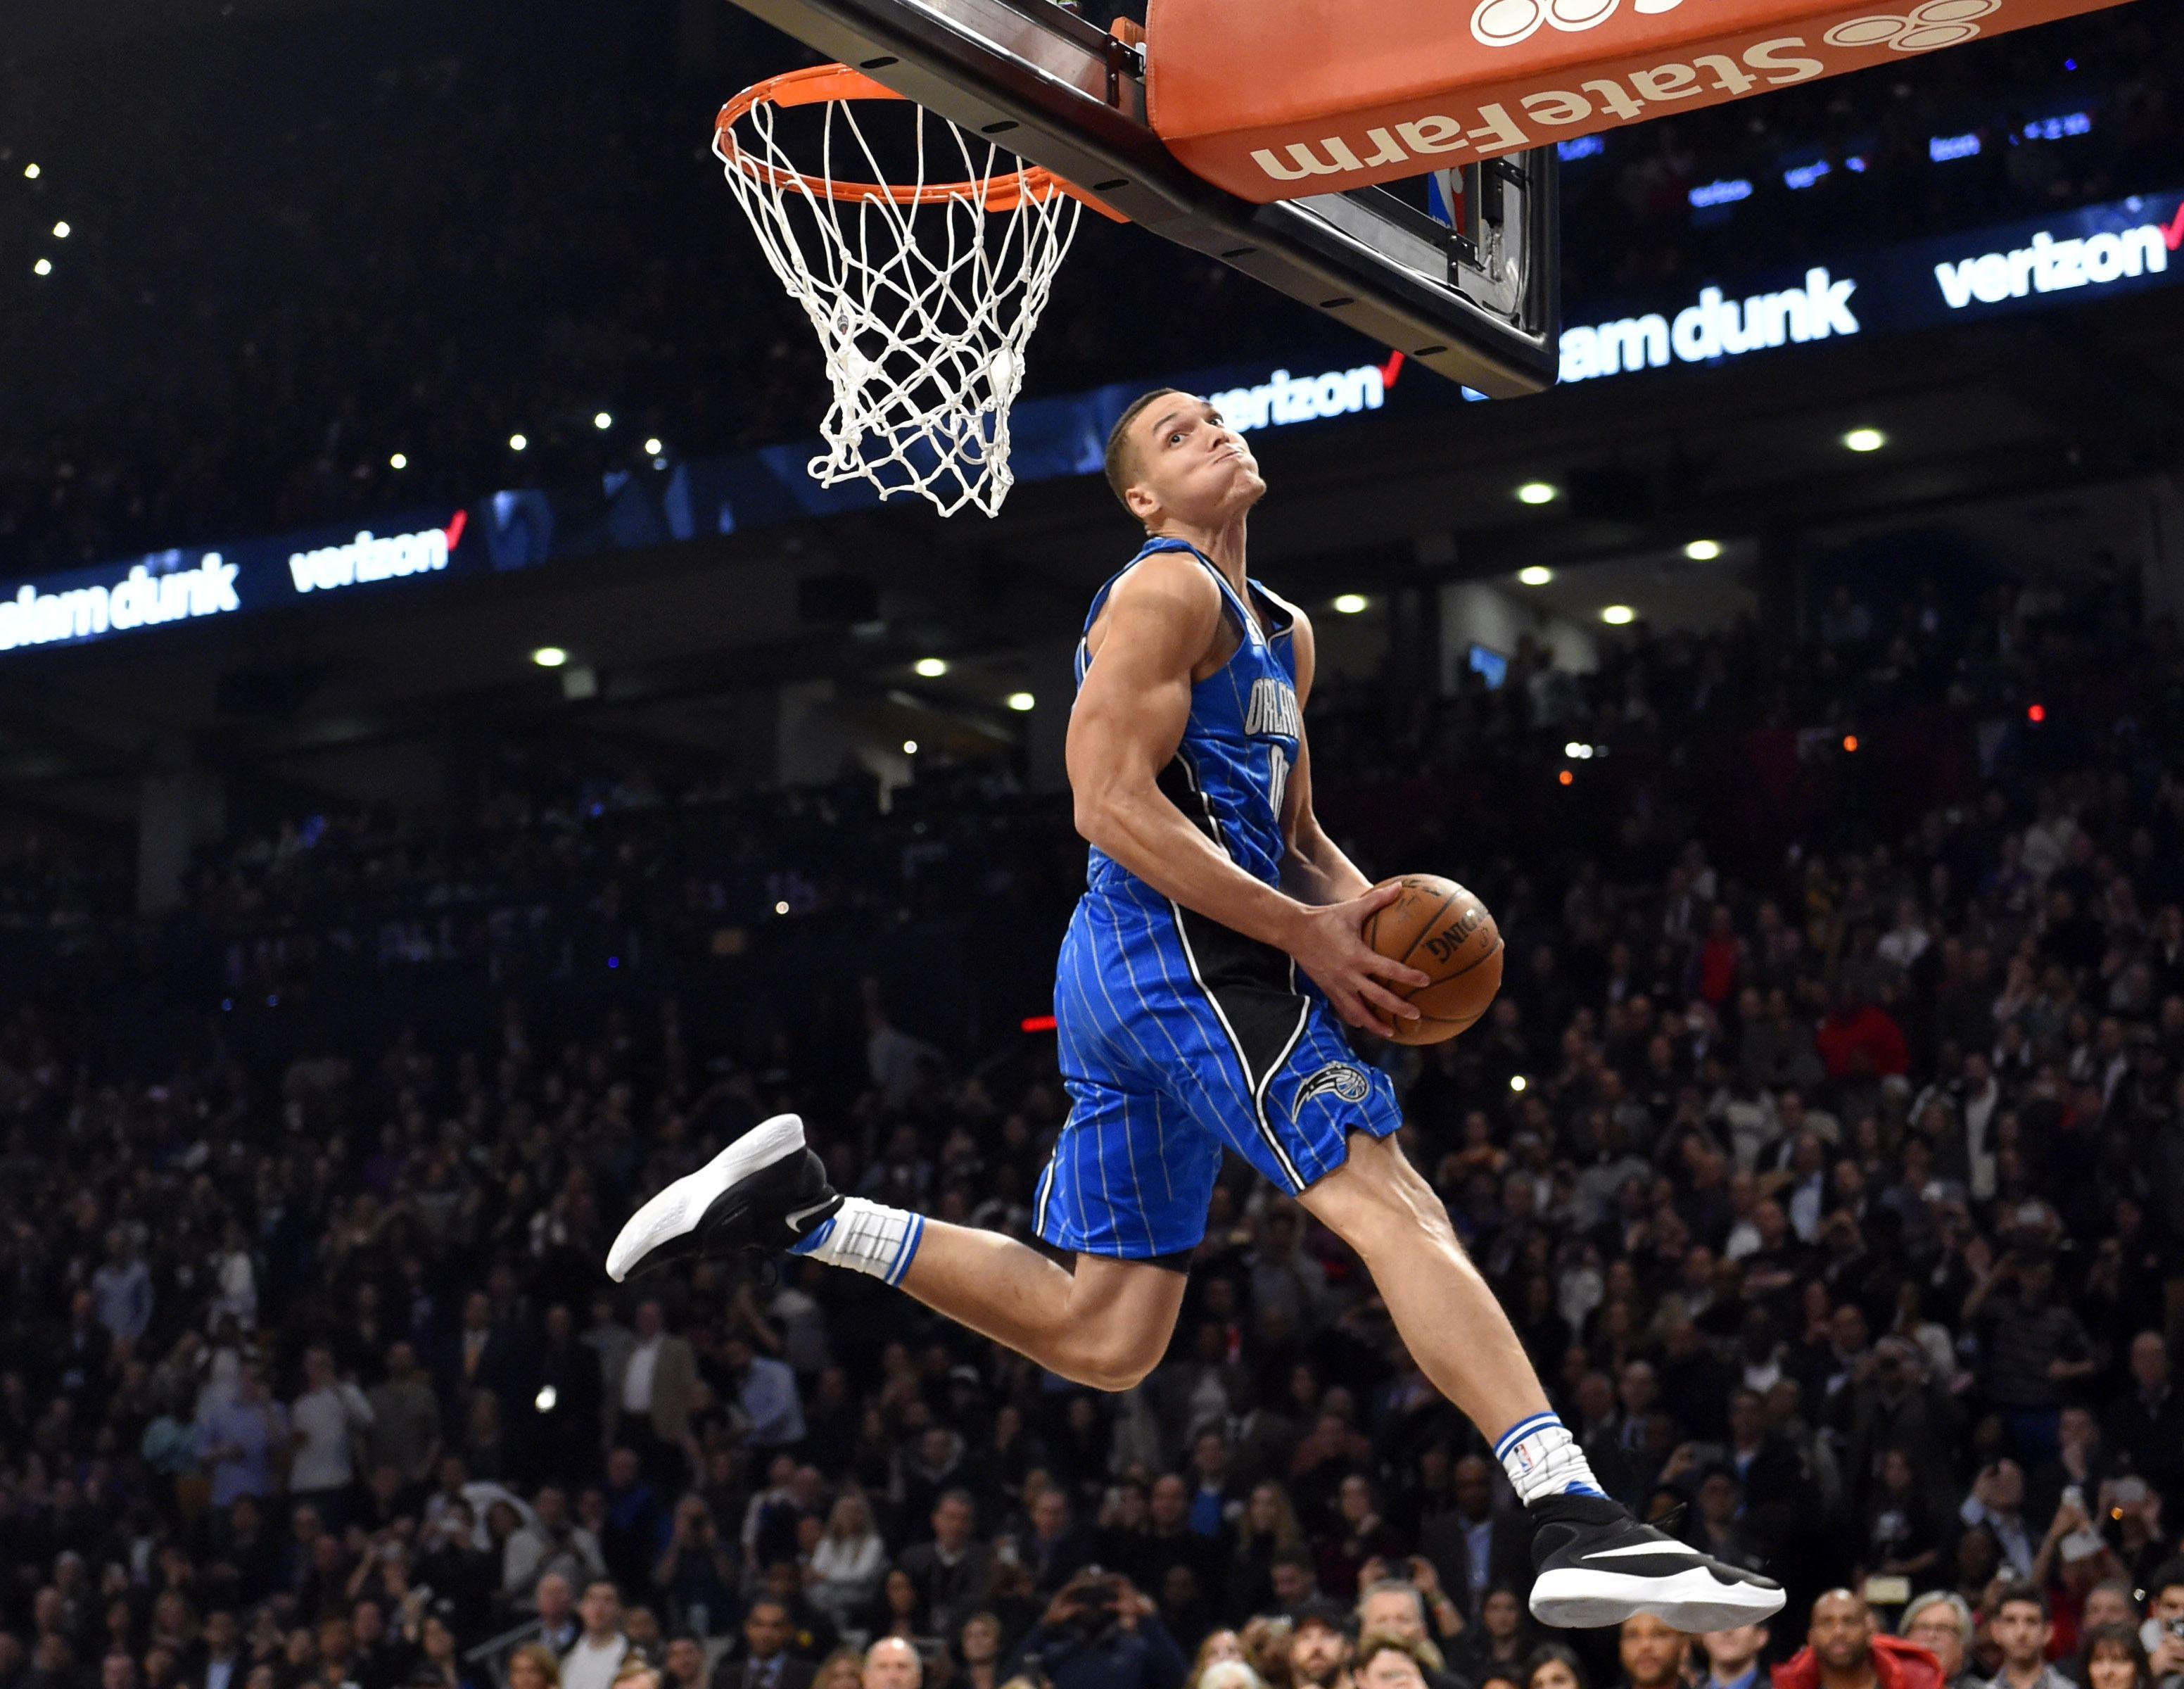 The 2016 NBA Dunk Contest in 7 astonishing photo